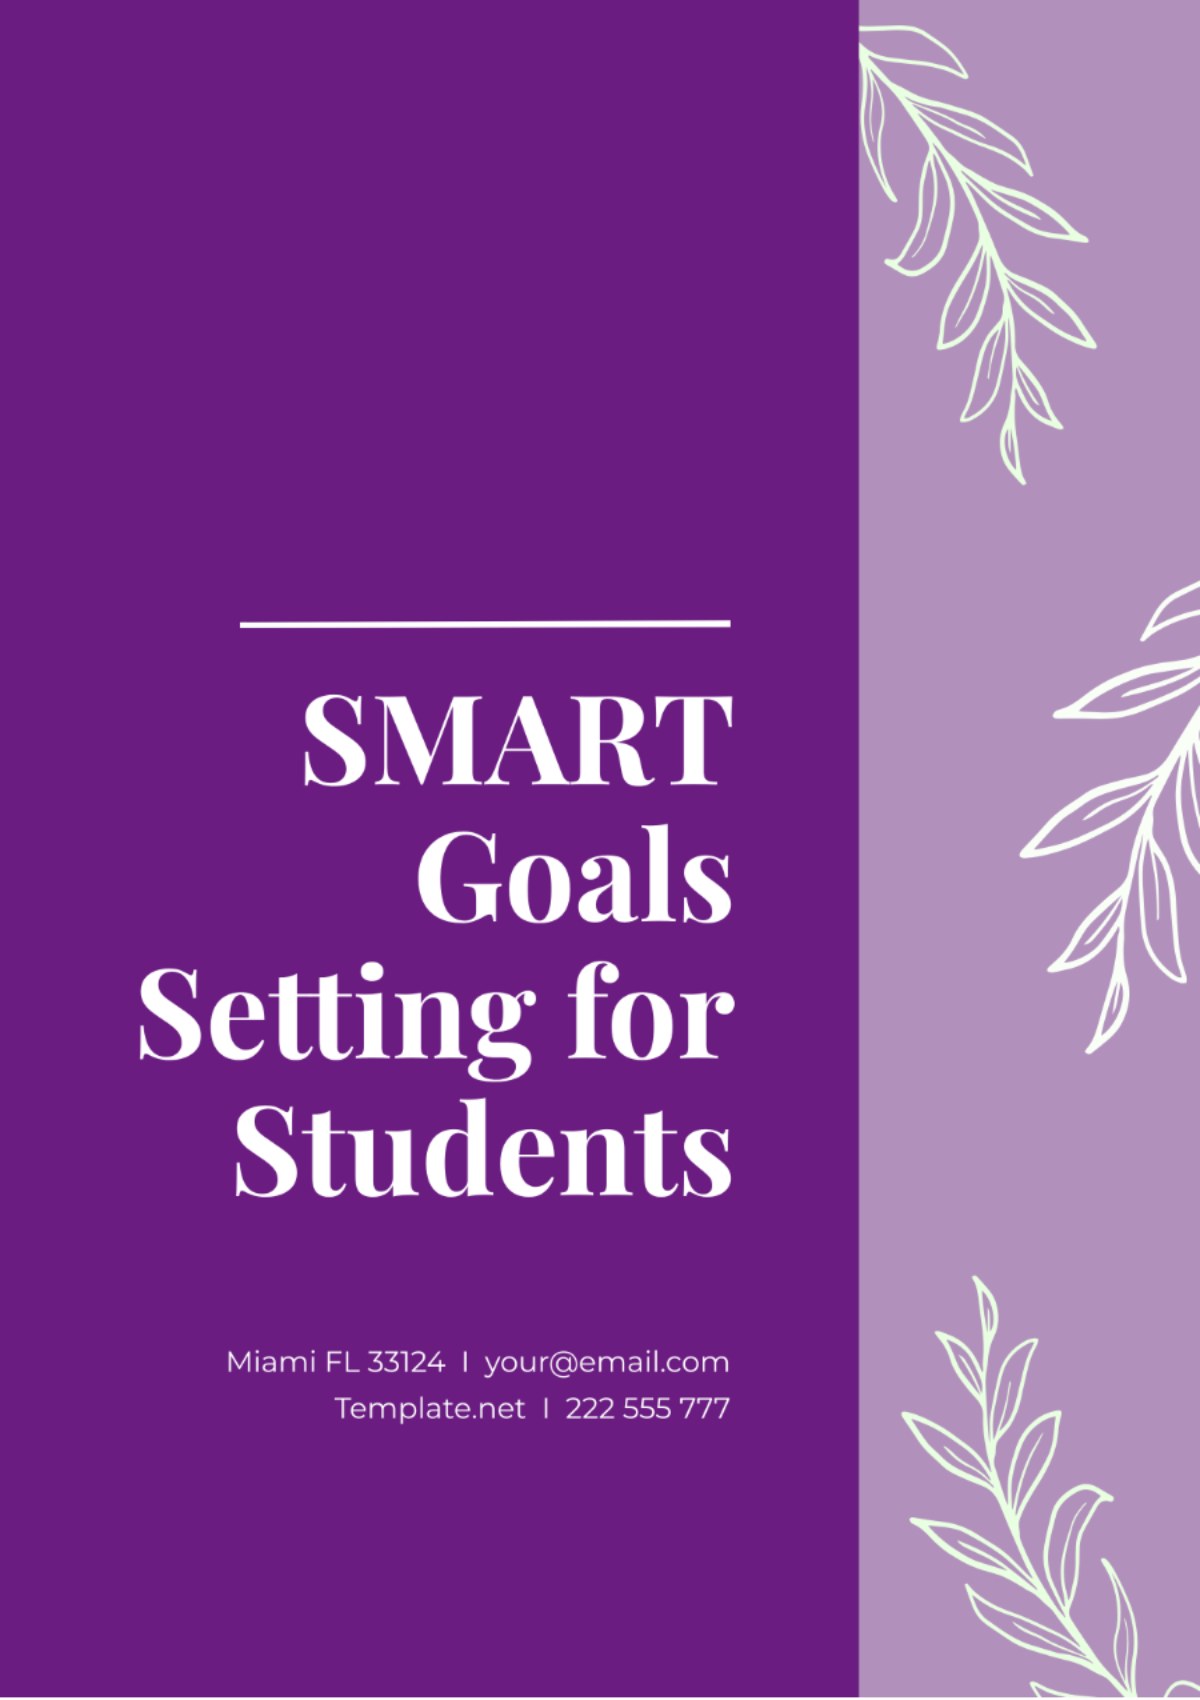 SMART Goals Setting for Students Template